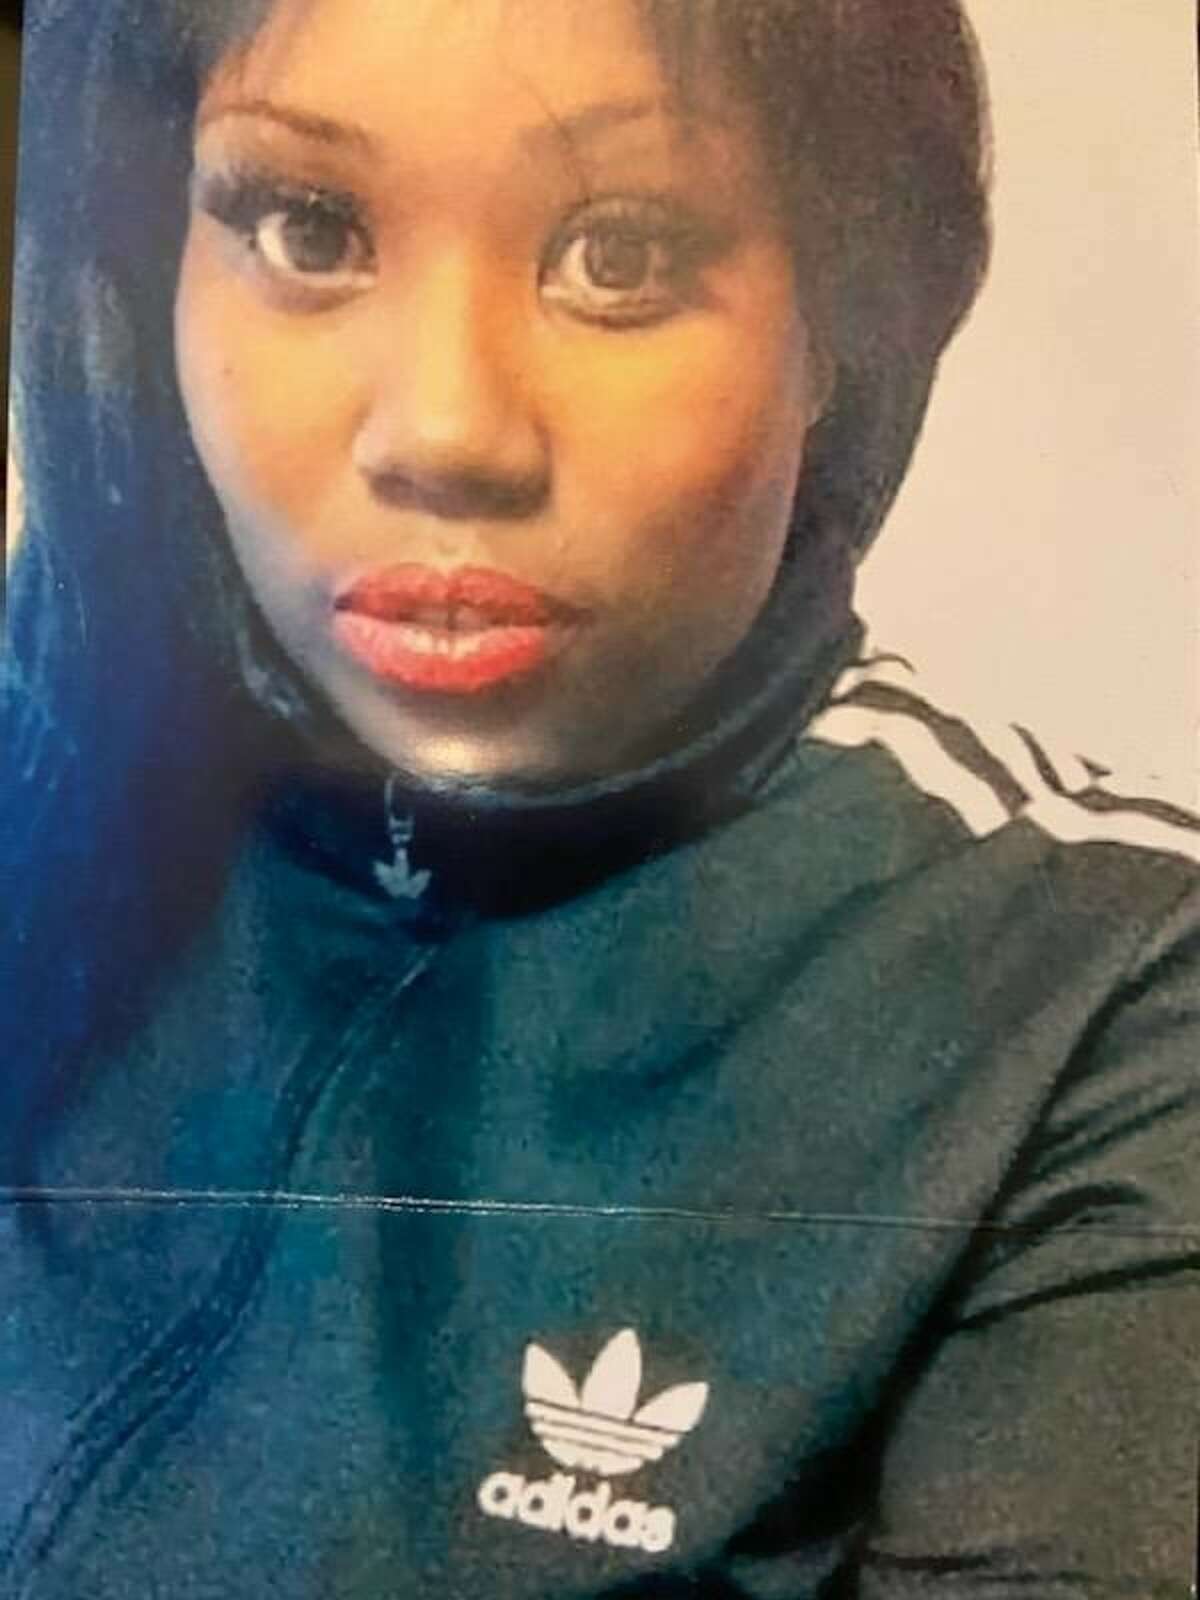 Ieasha Merritt was the victim of a fatal drive-by shooting in Schenectady. Court papers reveal how a group of men sought revenge for having a gun pointed at them the day before, and shot up an after hours club where Merritt was out with friends in 2020.